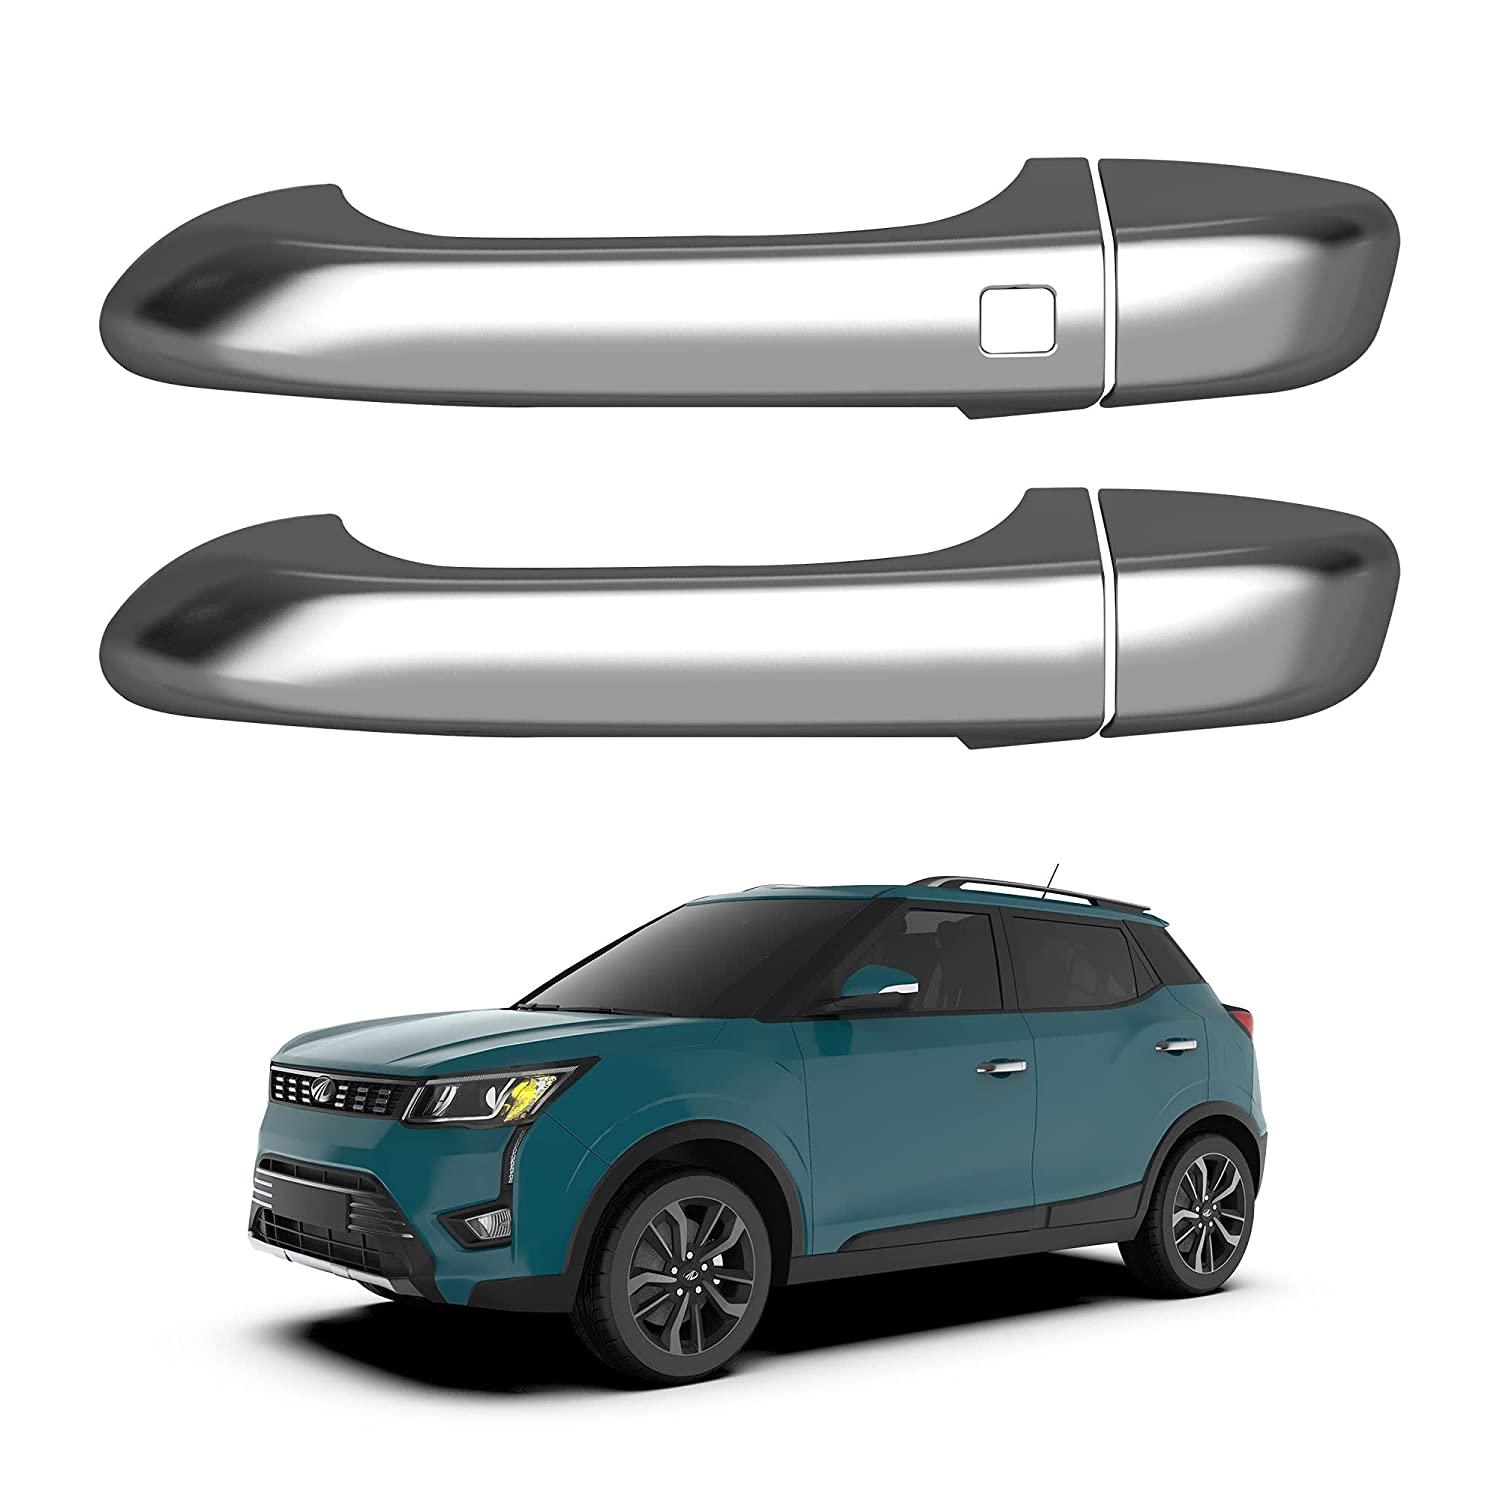 Galio Car Chrome Door Handle Cover for Mahindra XUV-300 (2019 Onwards) (Set of 4 pcs.)